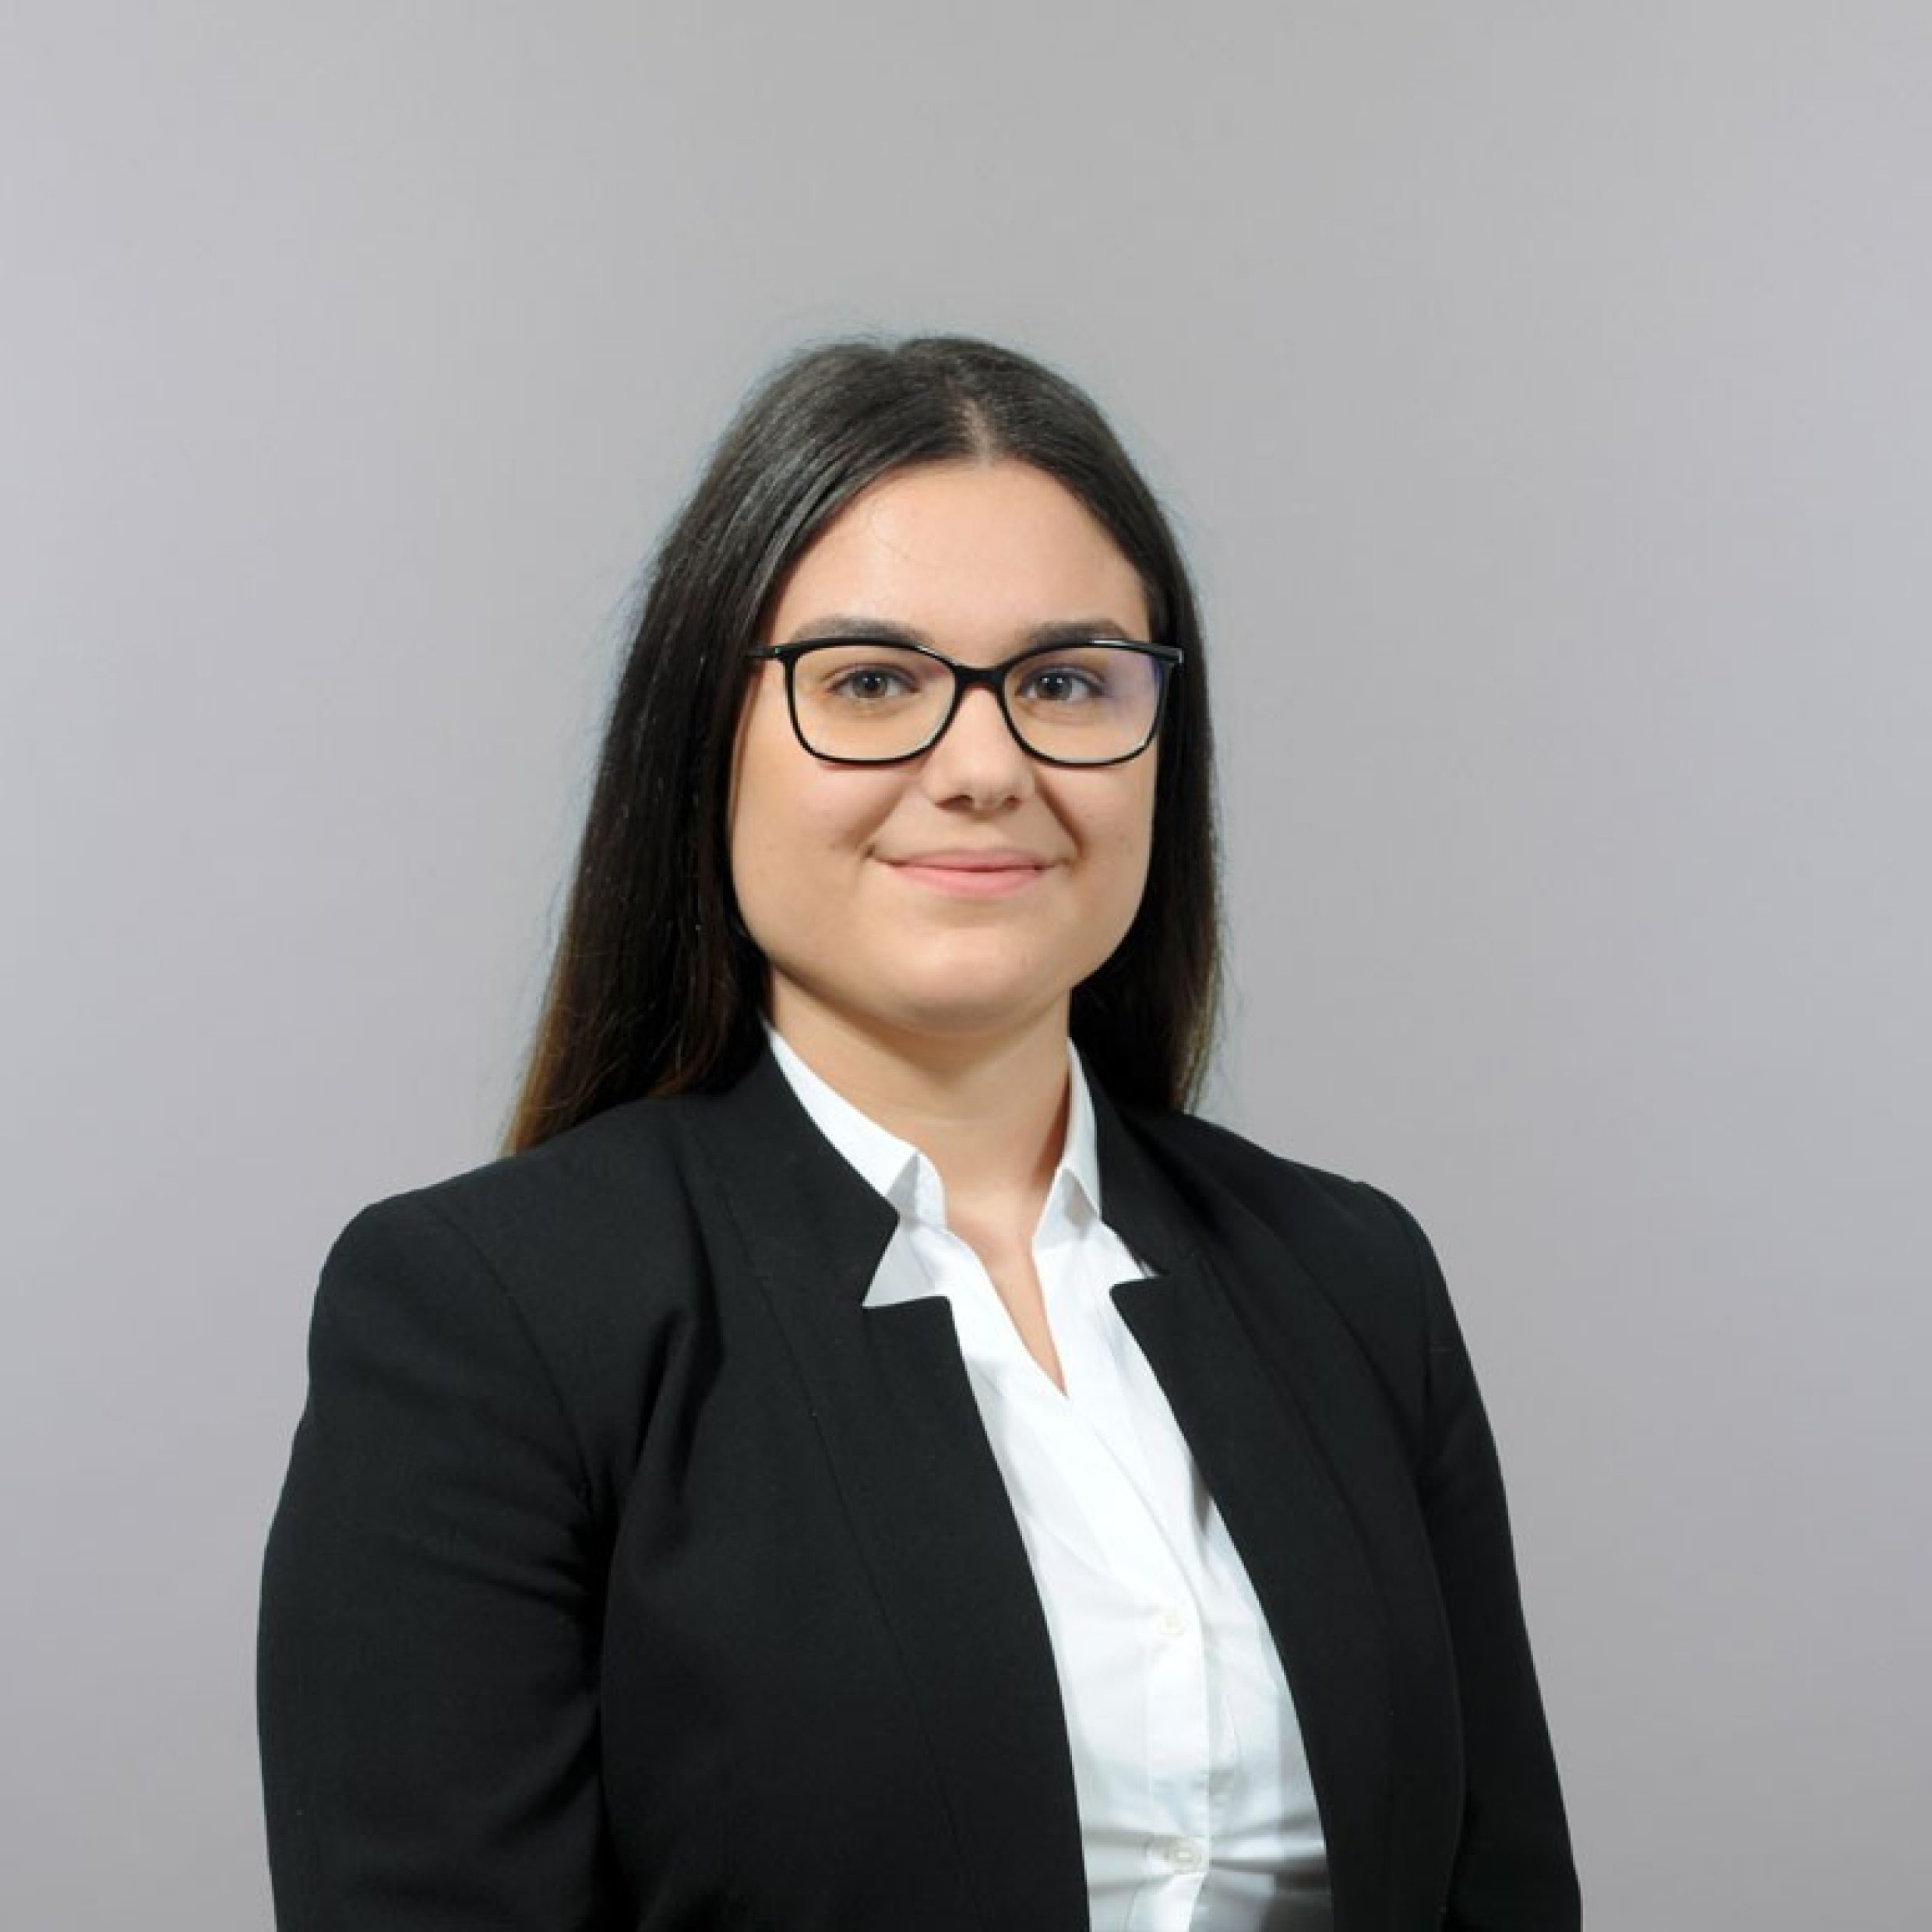 Business picture of a woman with dark hair and glasses.